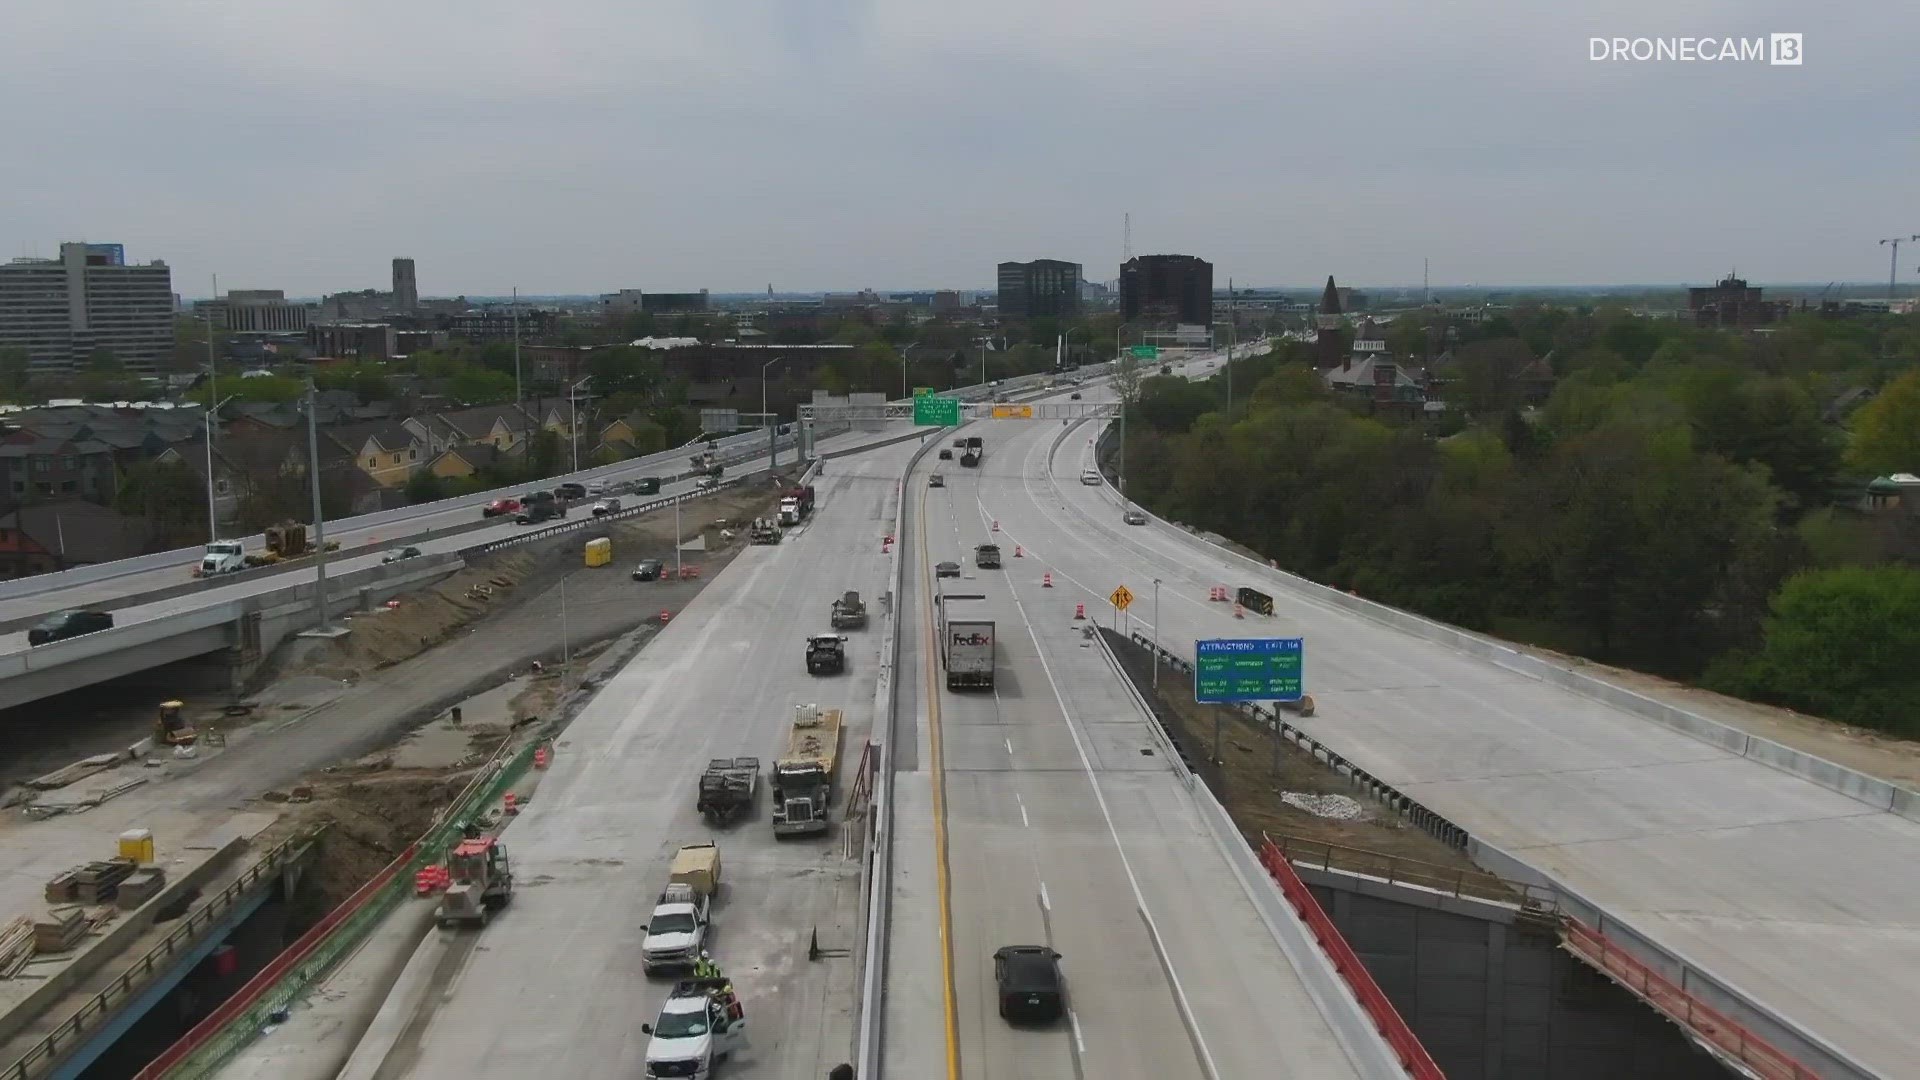 An I-465 detour associated with the project is also ending.